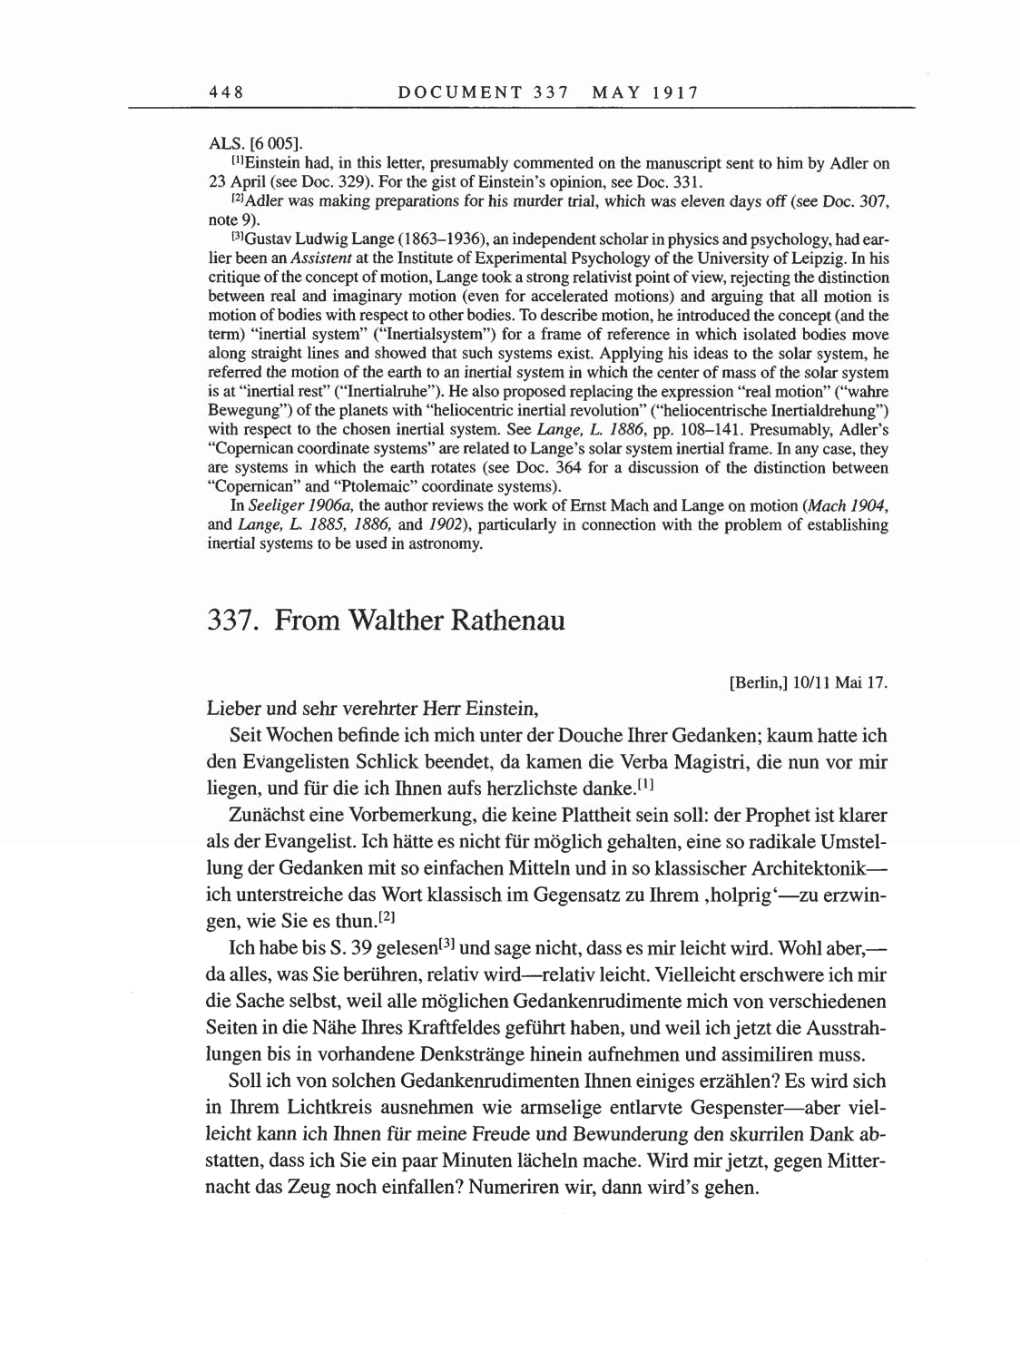 Volume 8, Part A: The Berlin Years: Correspondence 1914-1917 page 448